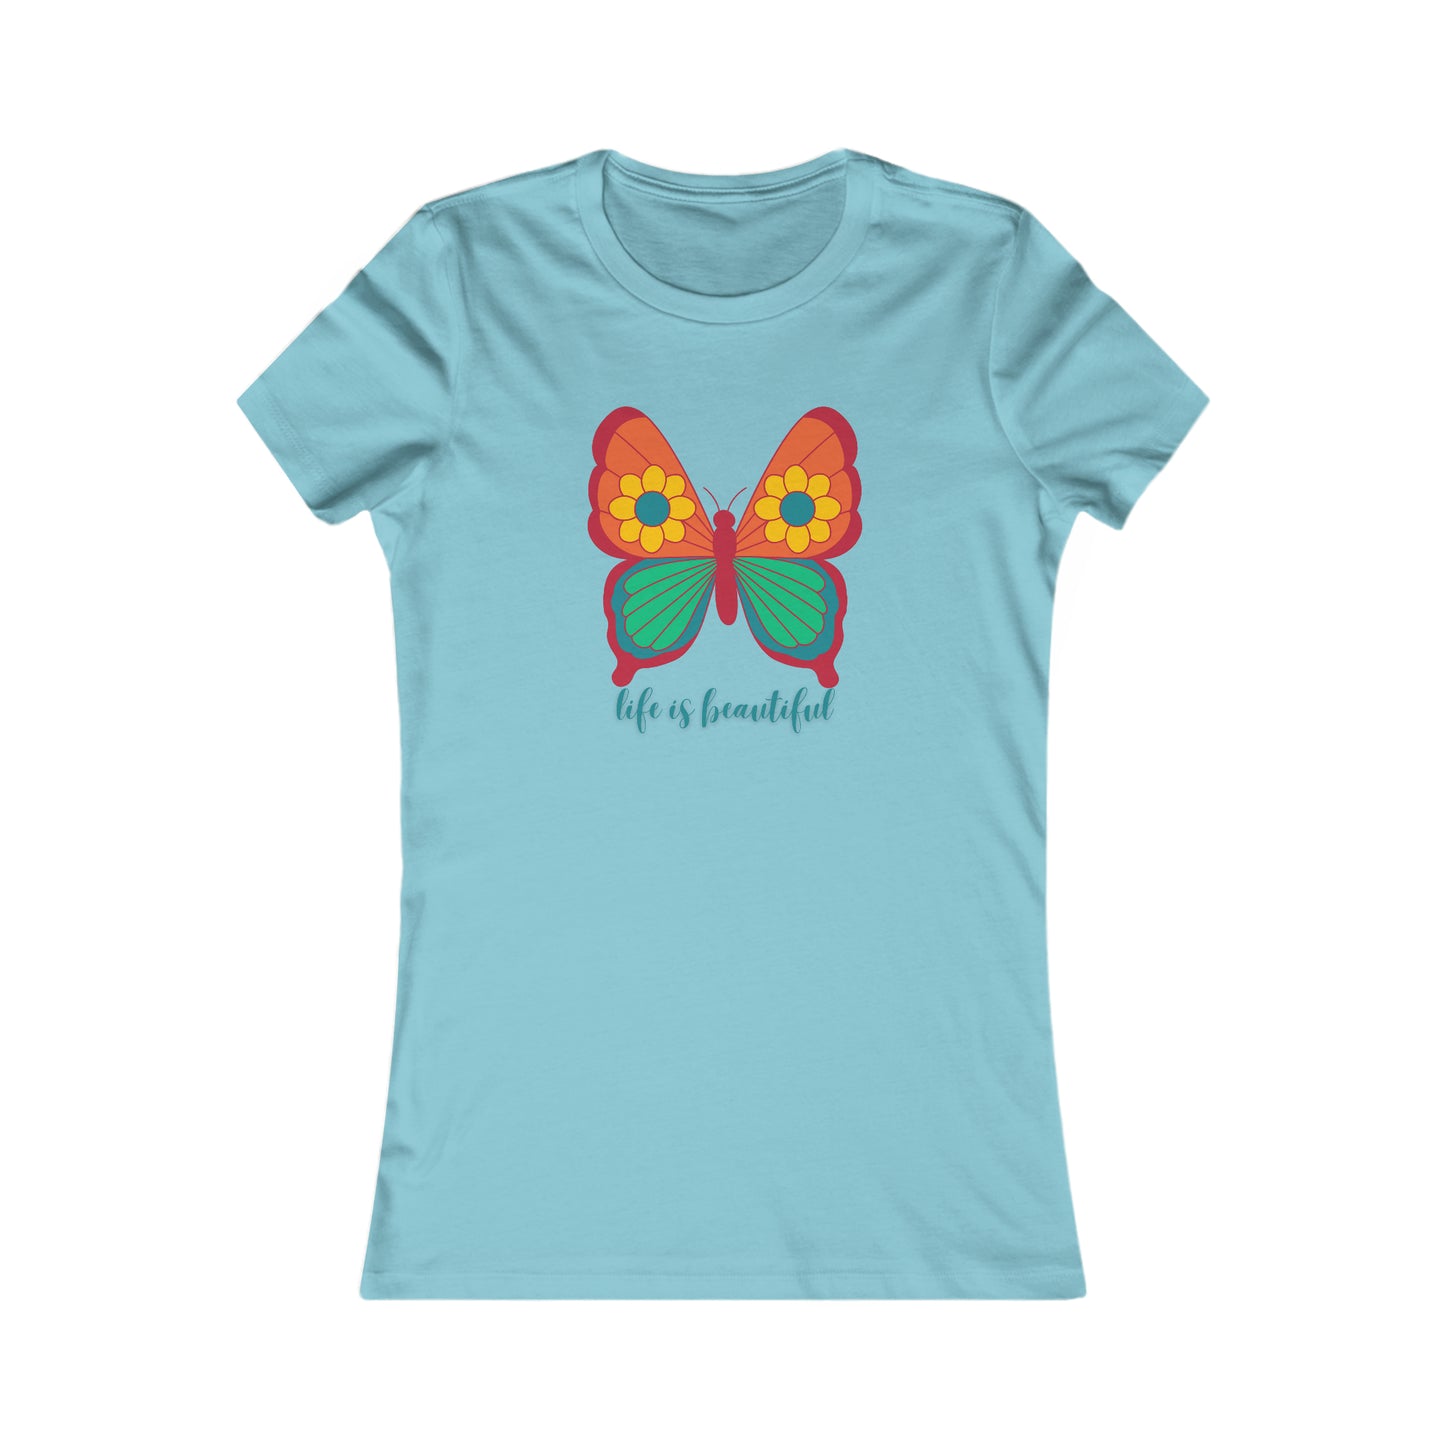 Colorful butterfly above a message of  “life is beautiful” in the center of this Women's Favorite Tee design. Slim fit so please check the size table.